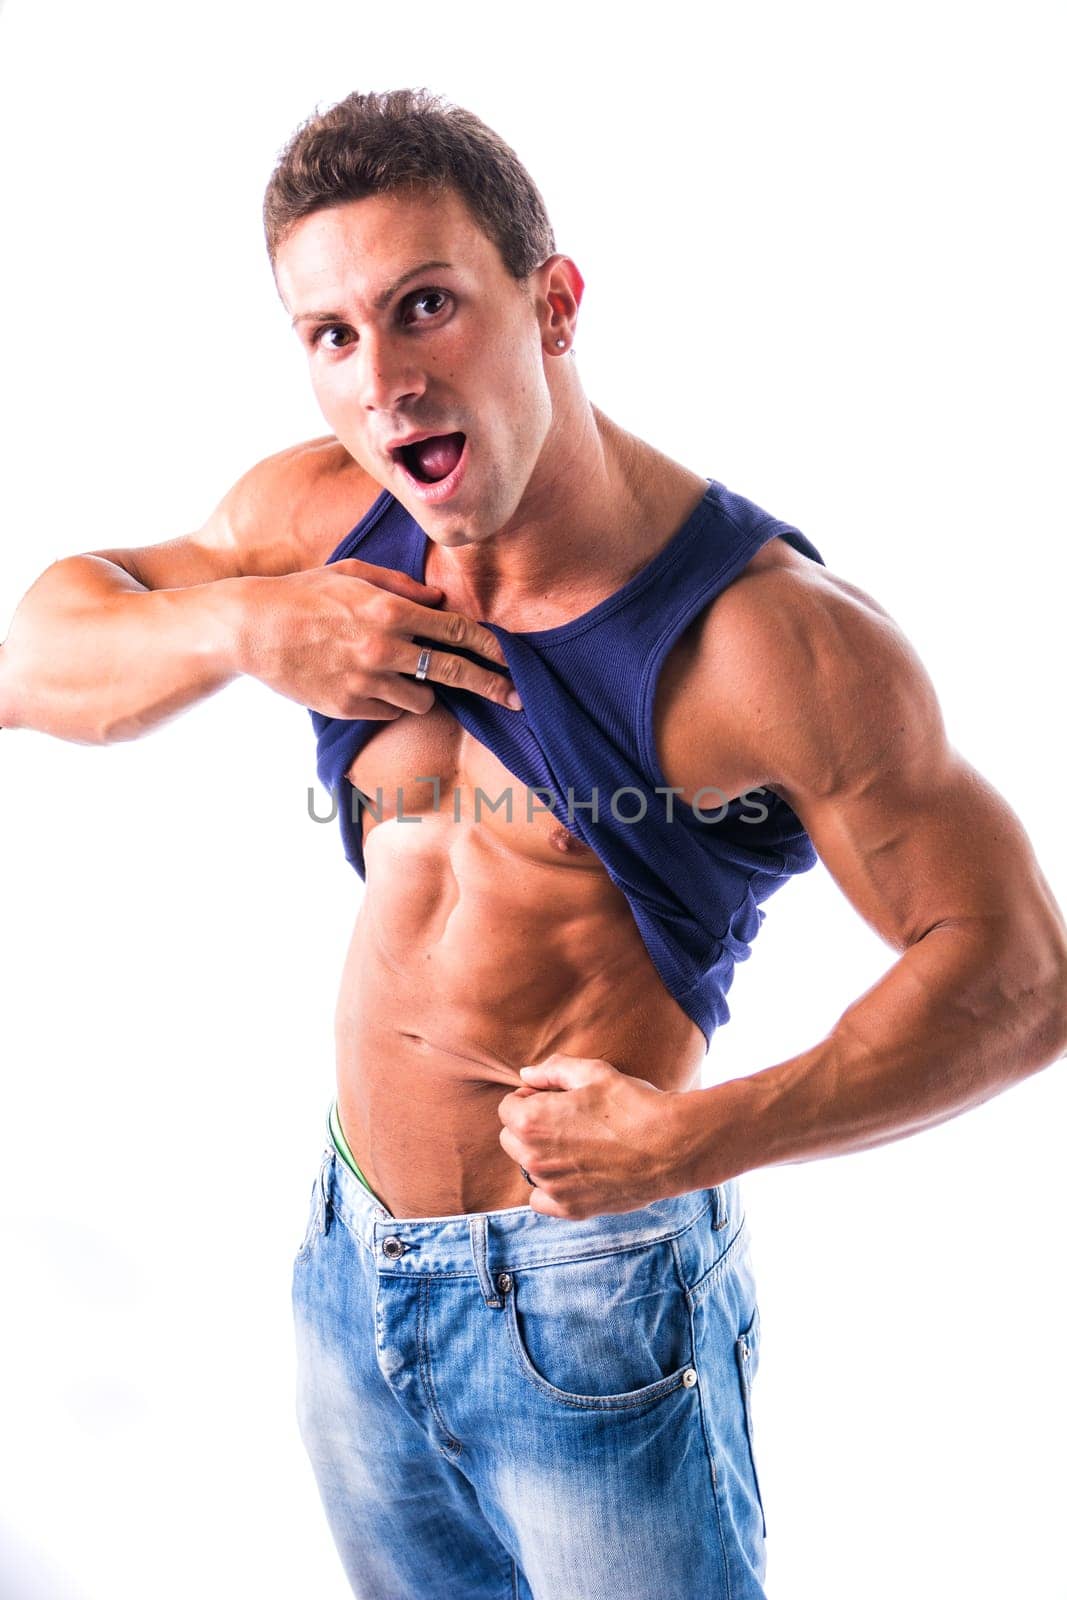 Fit muscular young man pinching his belly skin by artofphoto